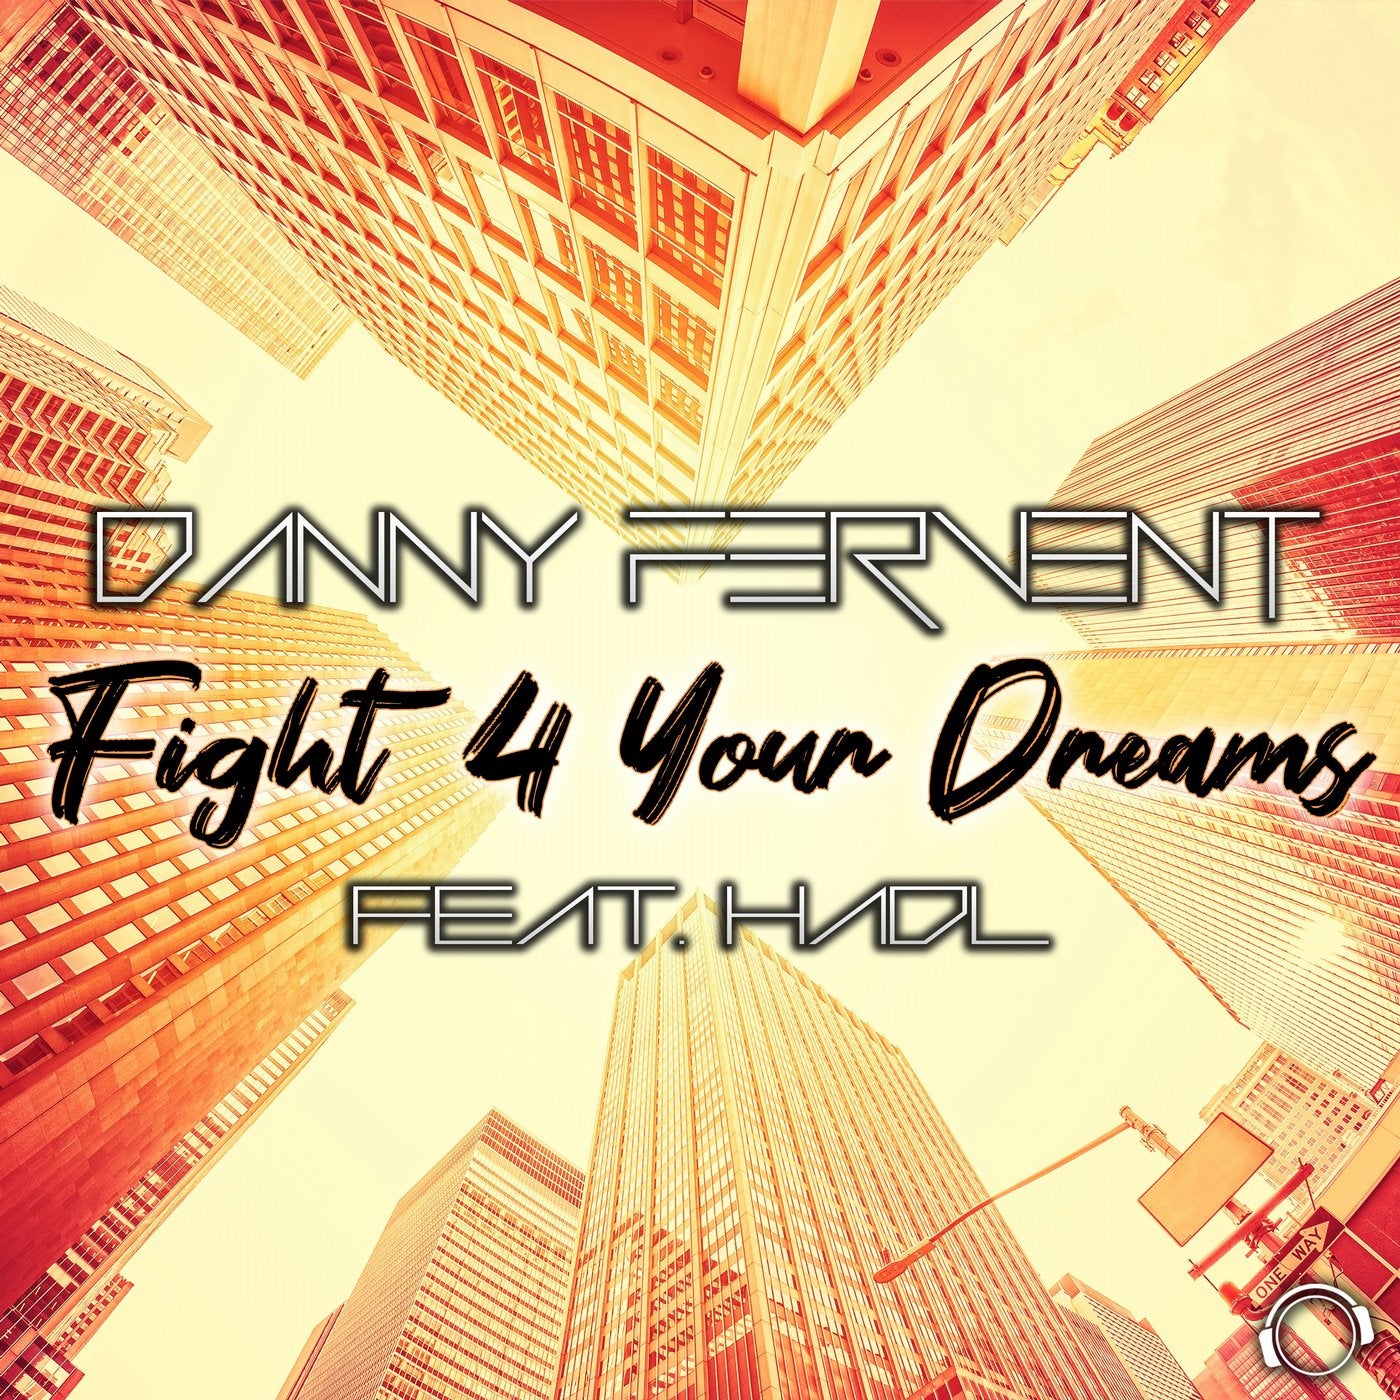 Fight 4 Your Dreams